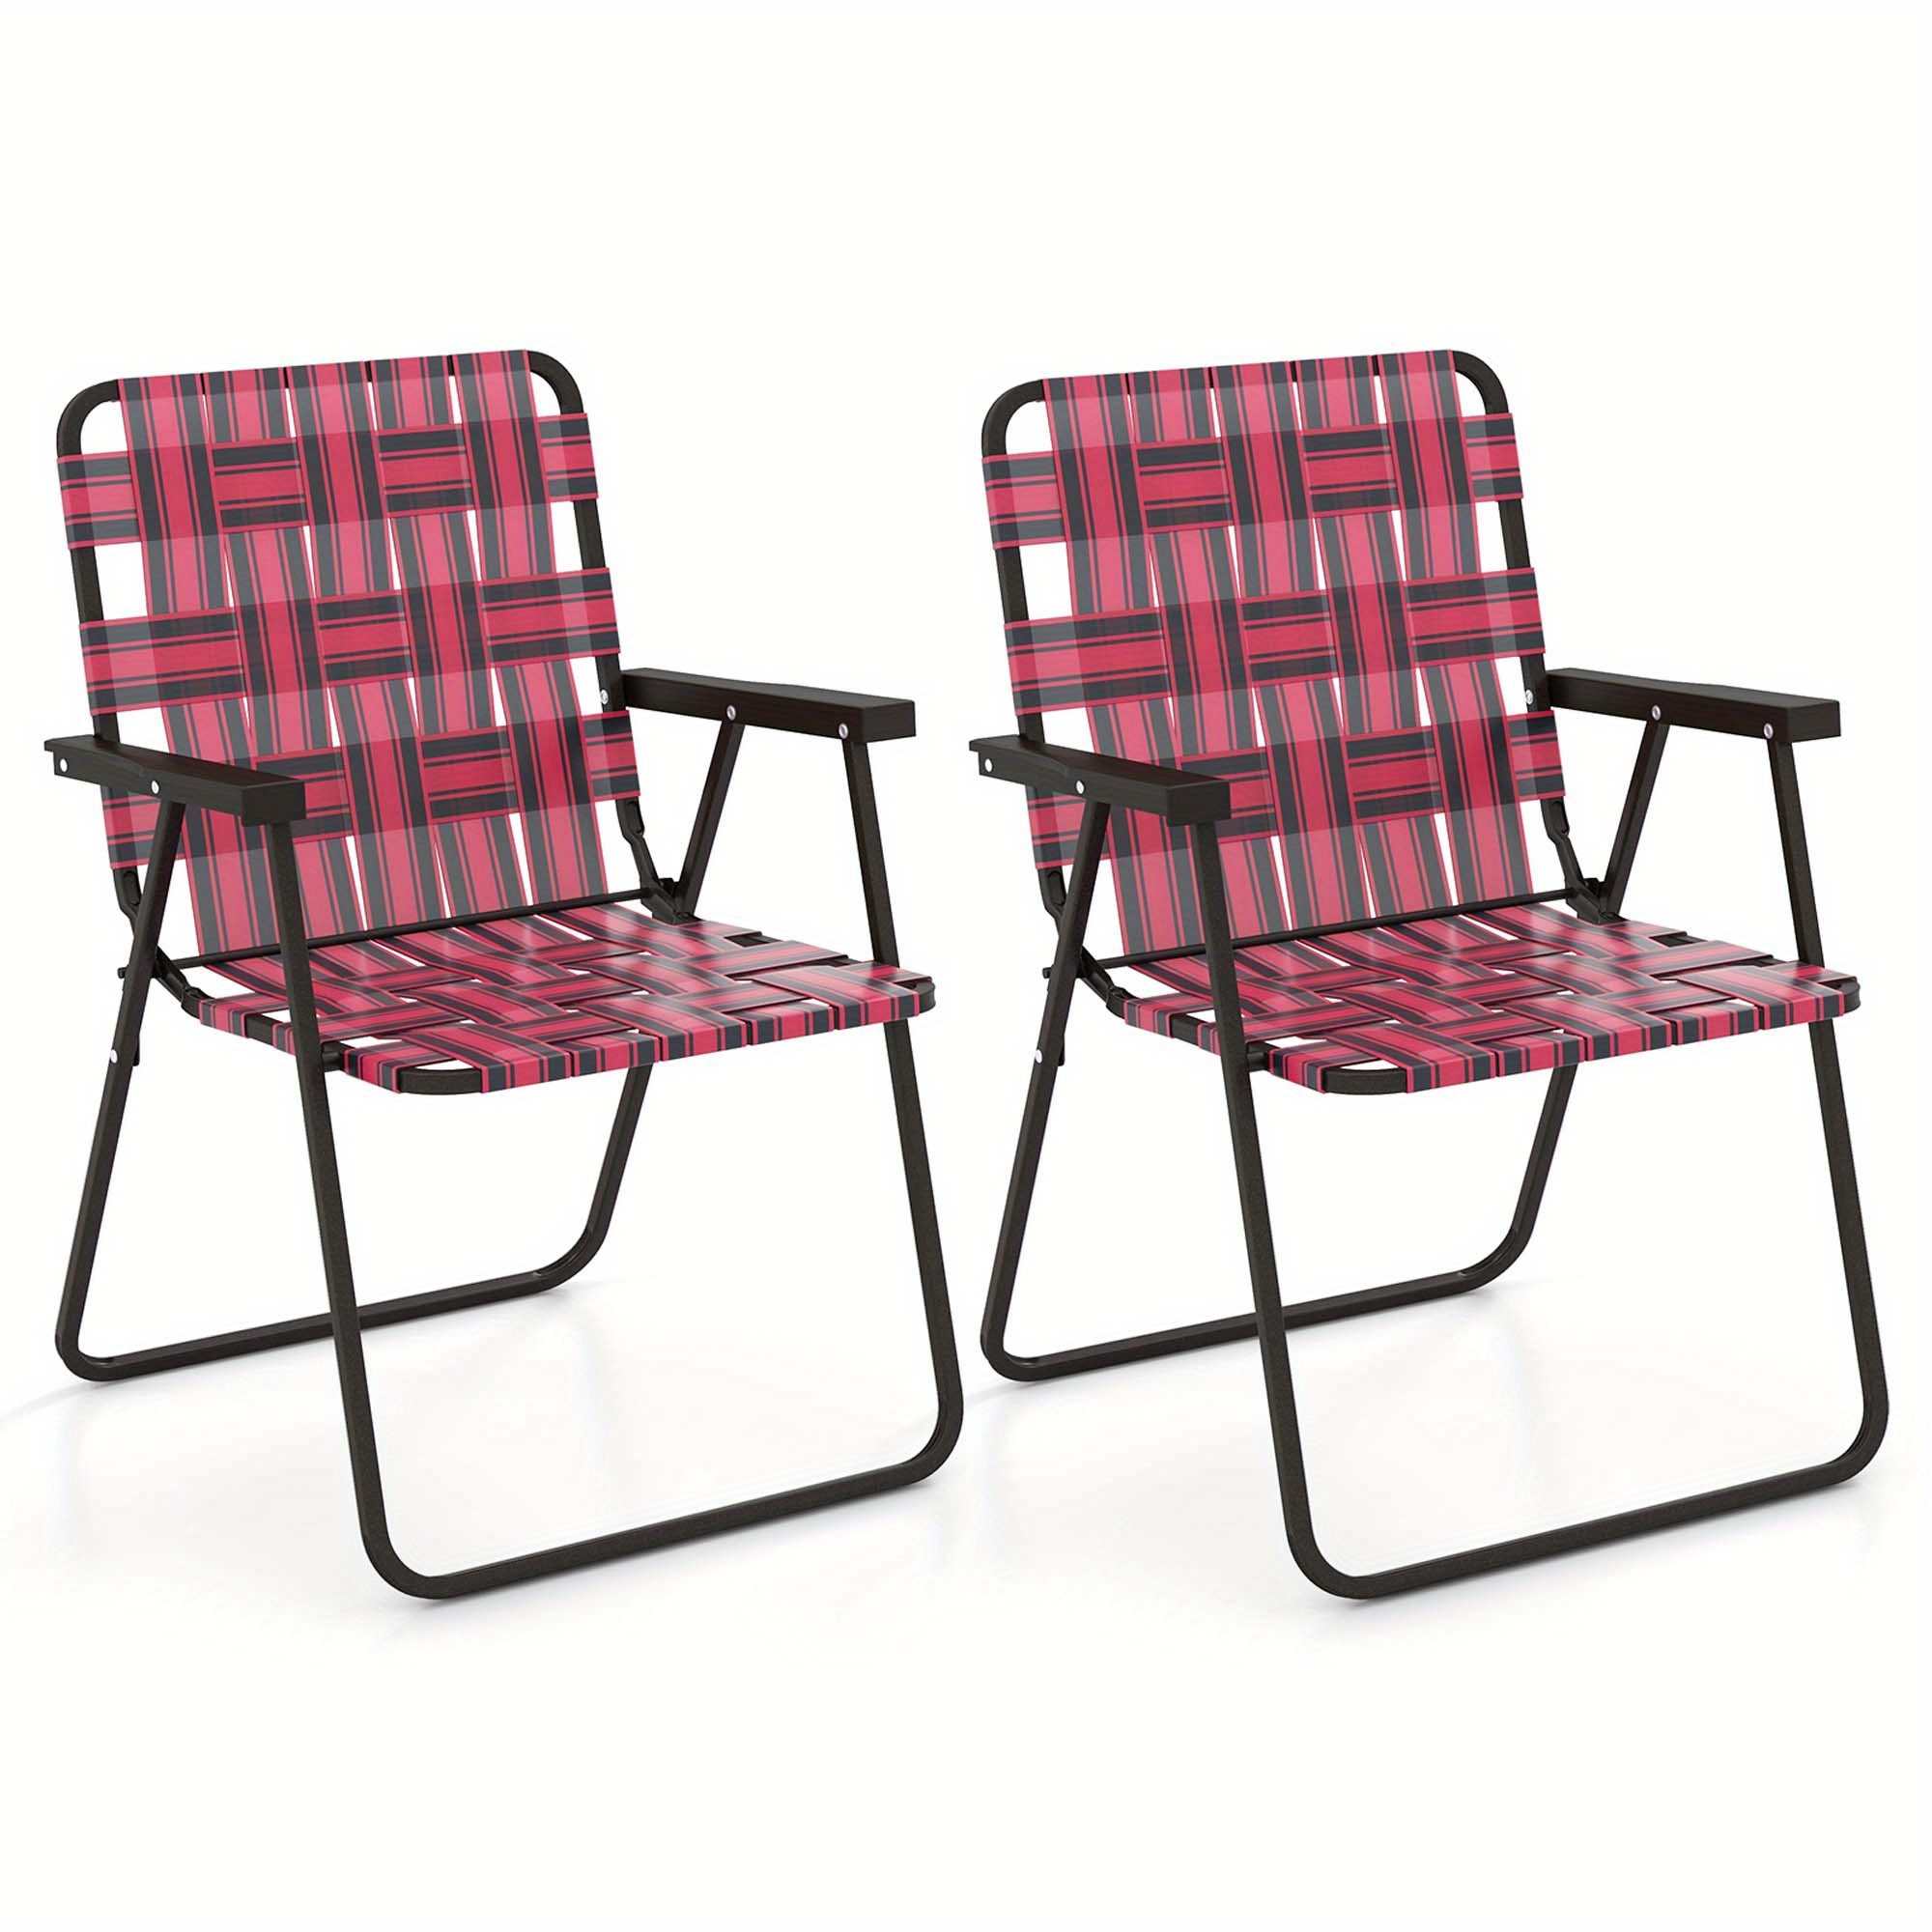 

Costway 2-pc S Folding Beach Chair Camping Lawn Webbing Chair Lightweight 1 Position Red